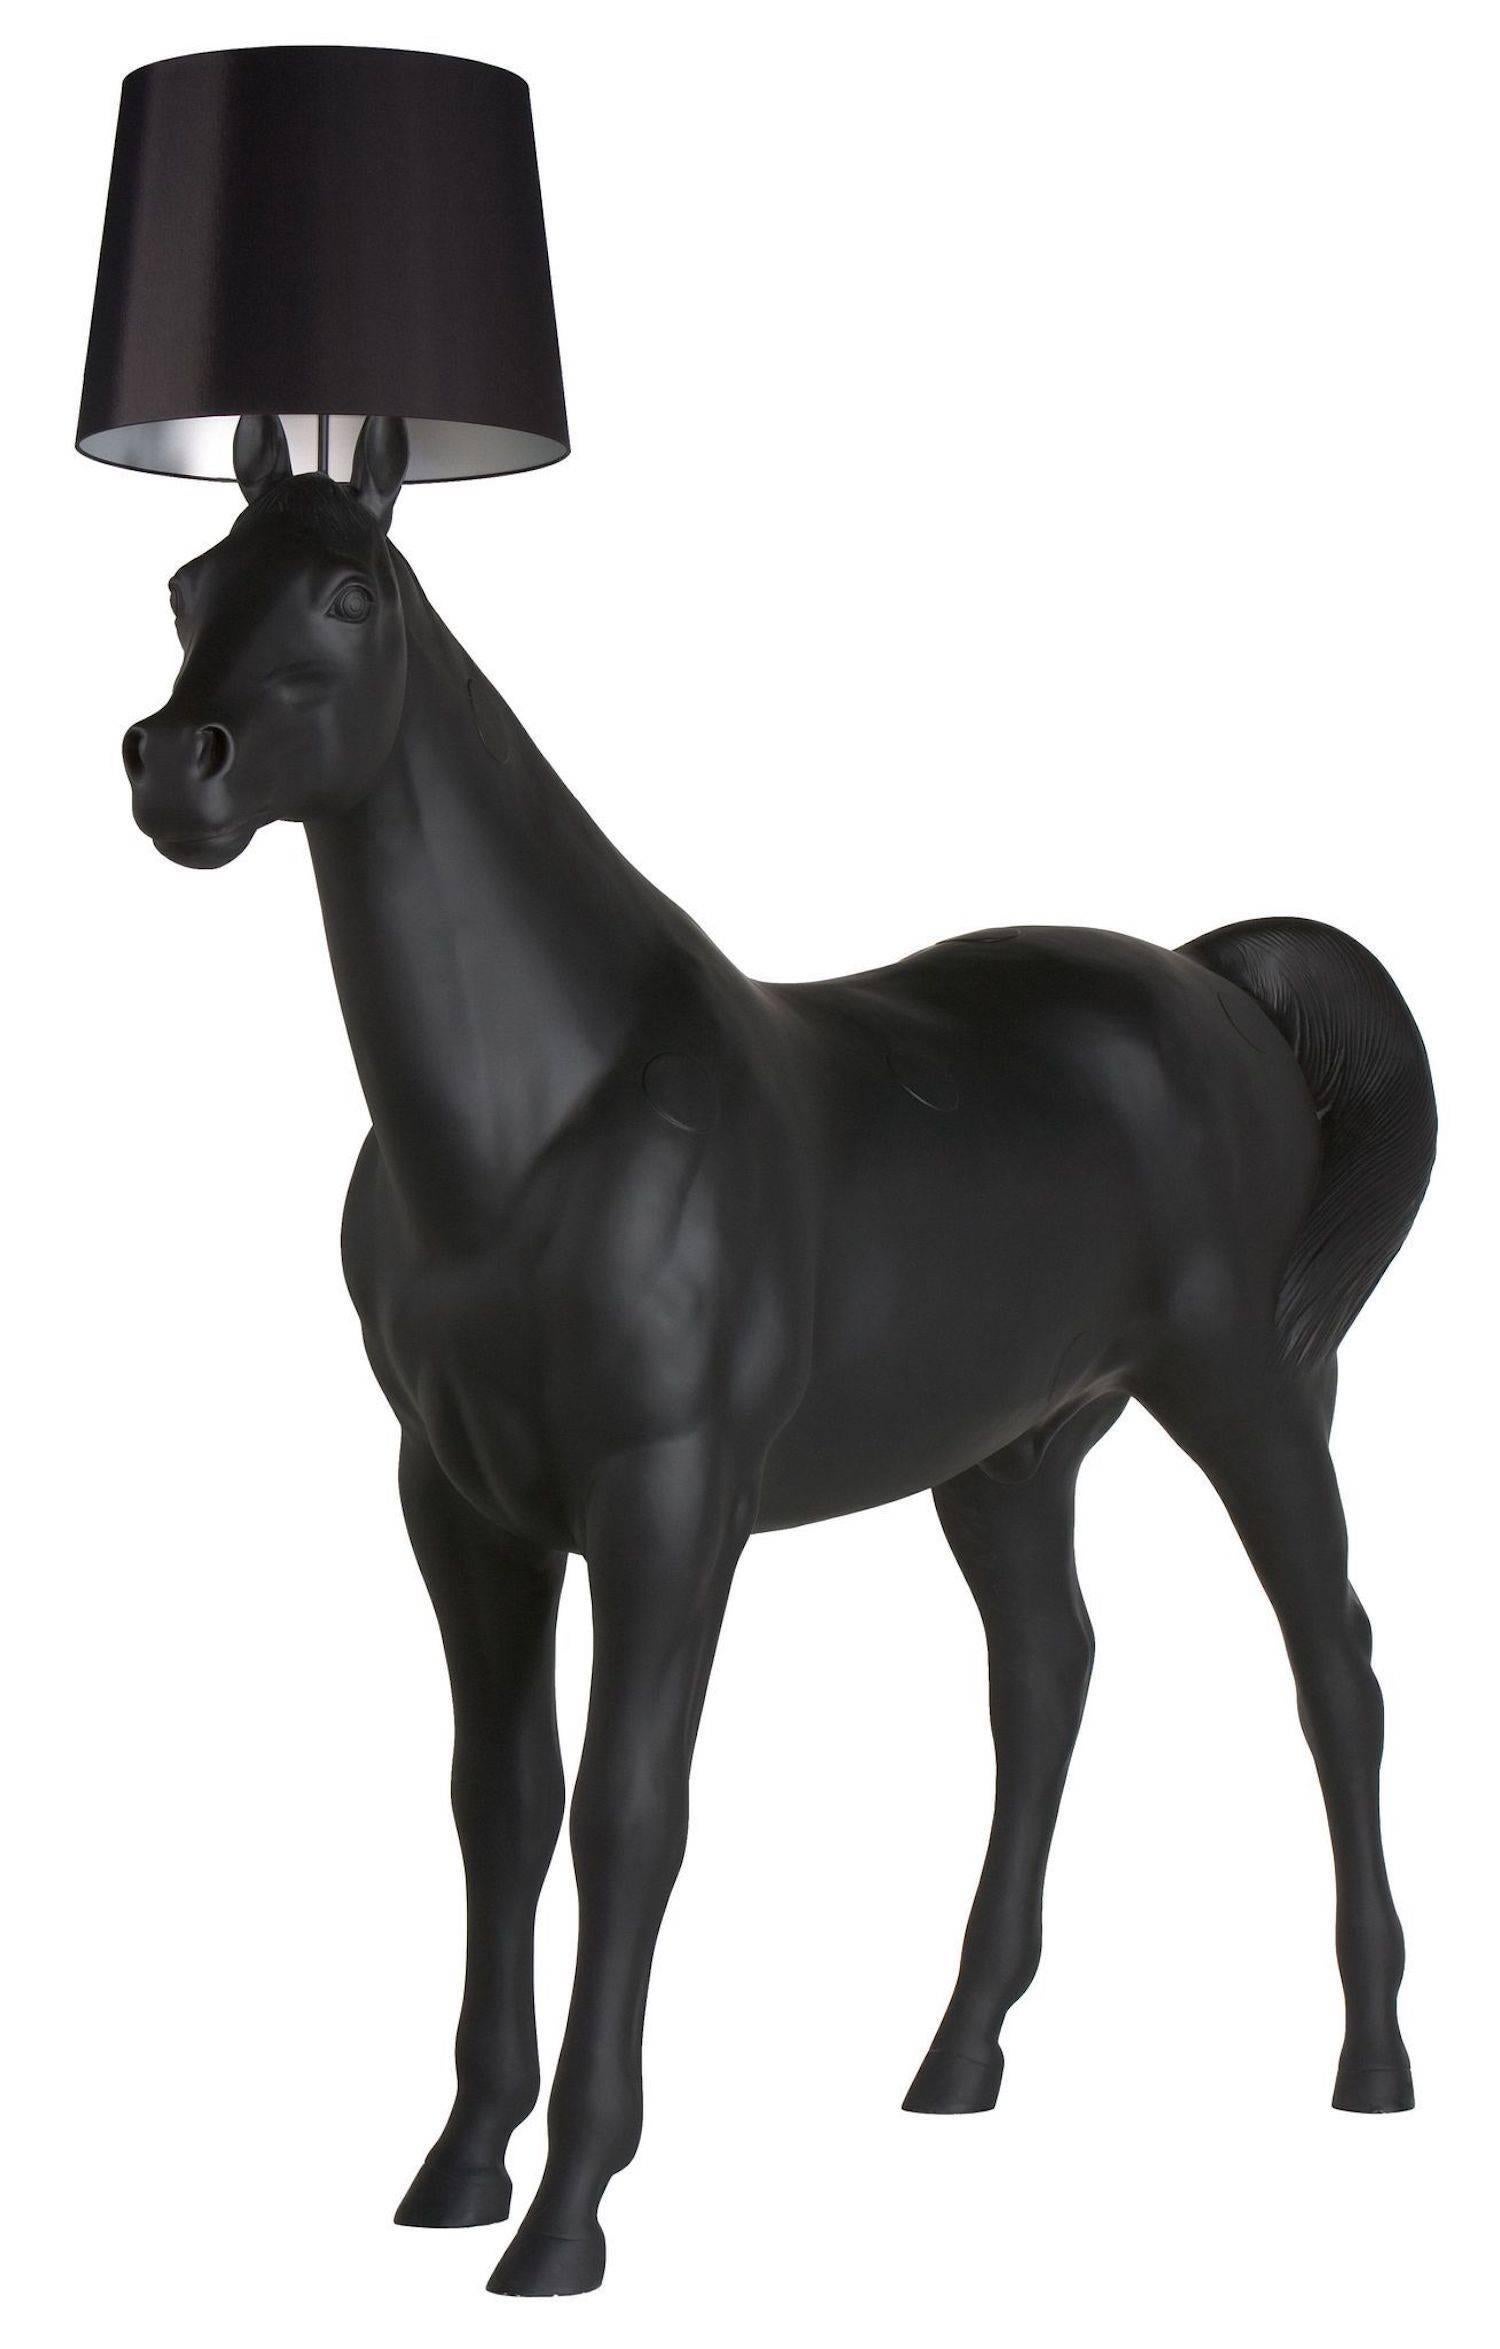 Designed by Front Design, the Horse Lamp is a full scale Horse floor lamp made of PVC viscose laminate shade, a metal frame structure and polyester Horse.

For indoor use only. The inside of the shade has a silver grey color which reflects the